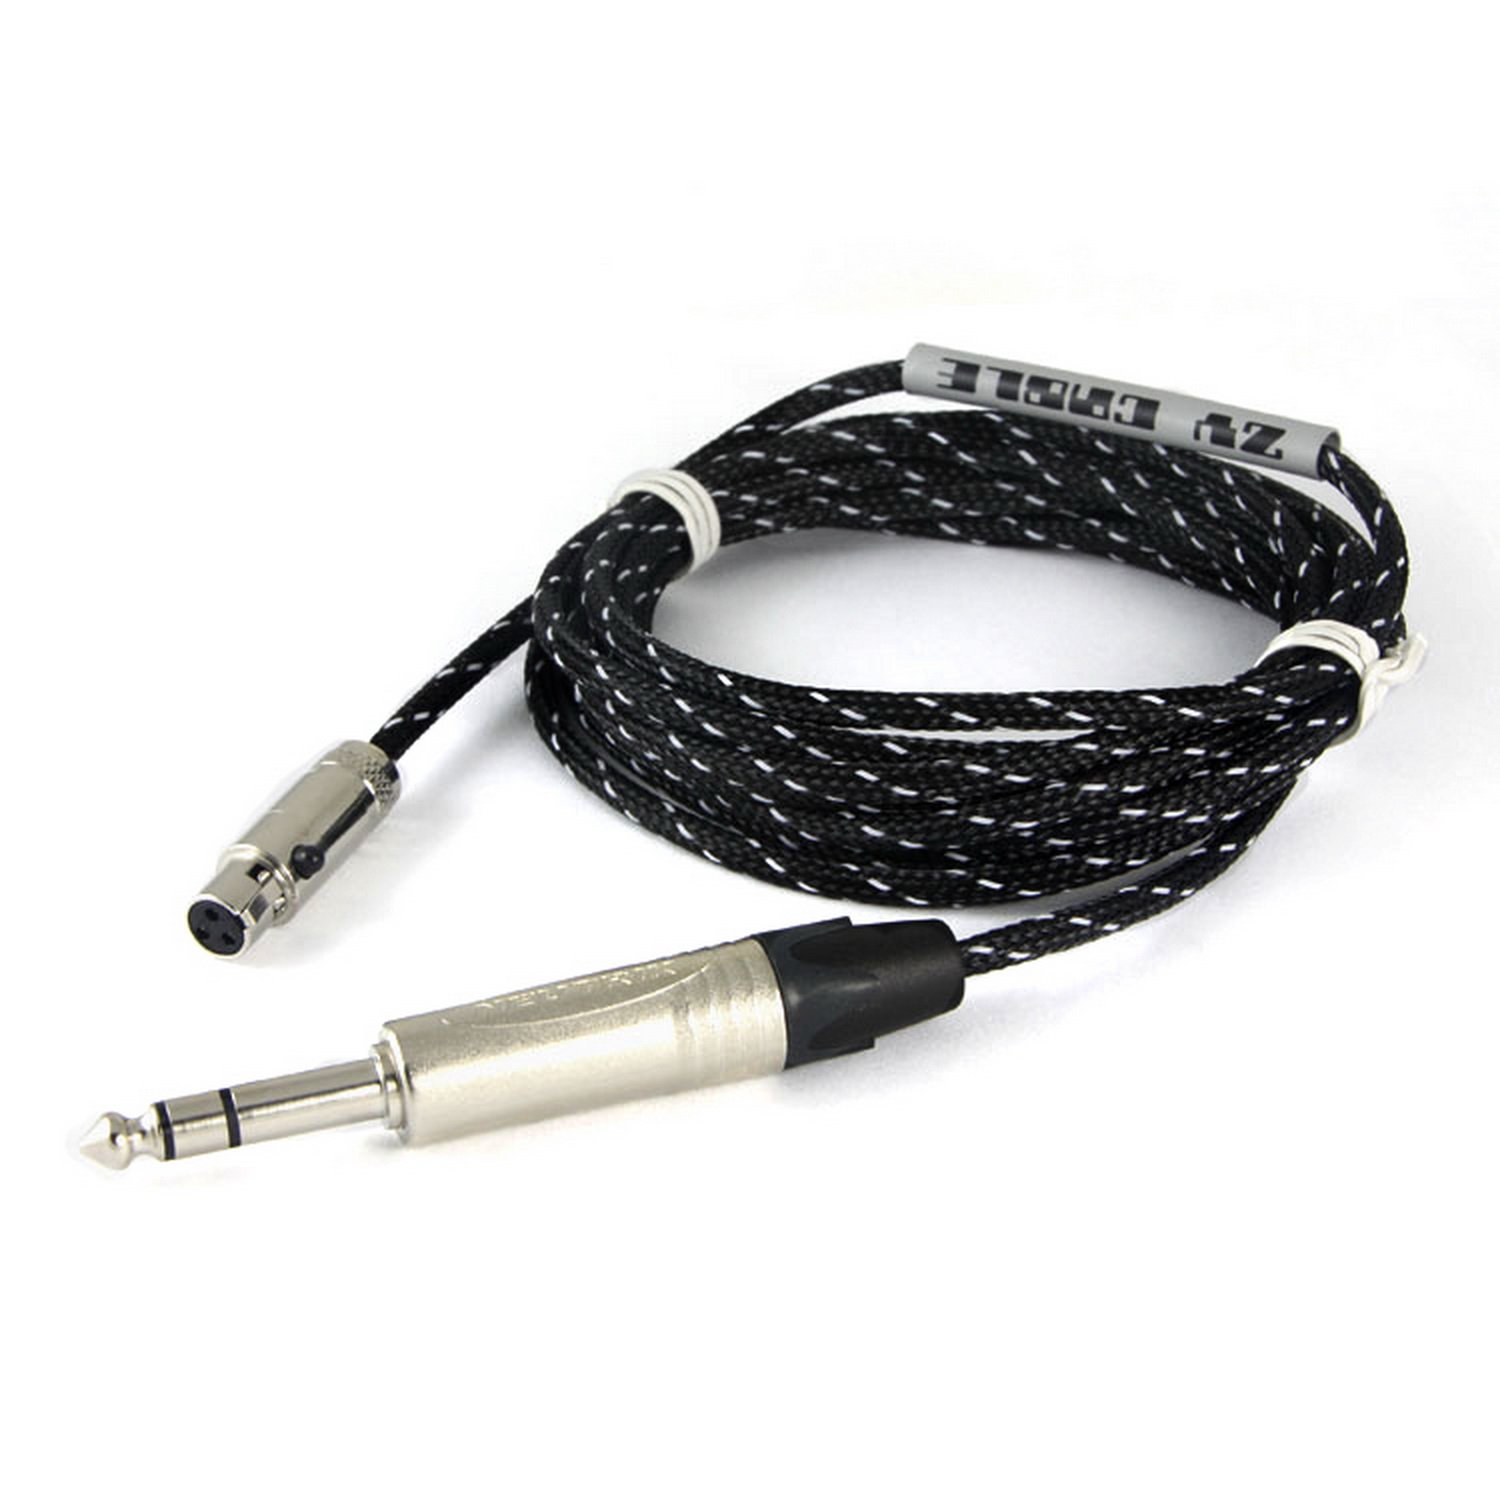 ZY HiFi Cable PAILICCS Cable Professional Headphone Upgrade Cable for K271s 240S K702 ZY-008